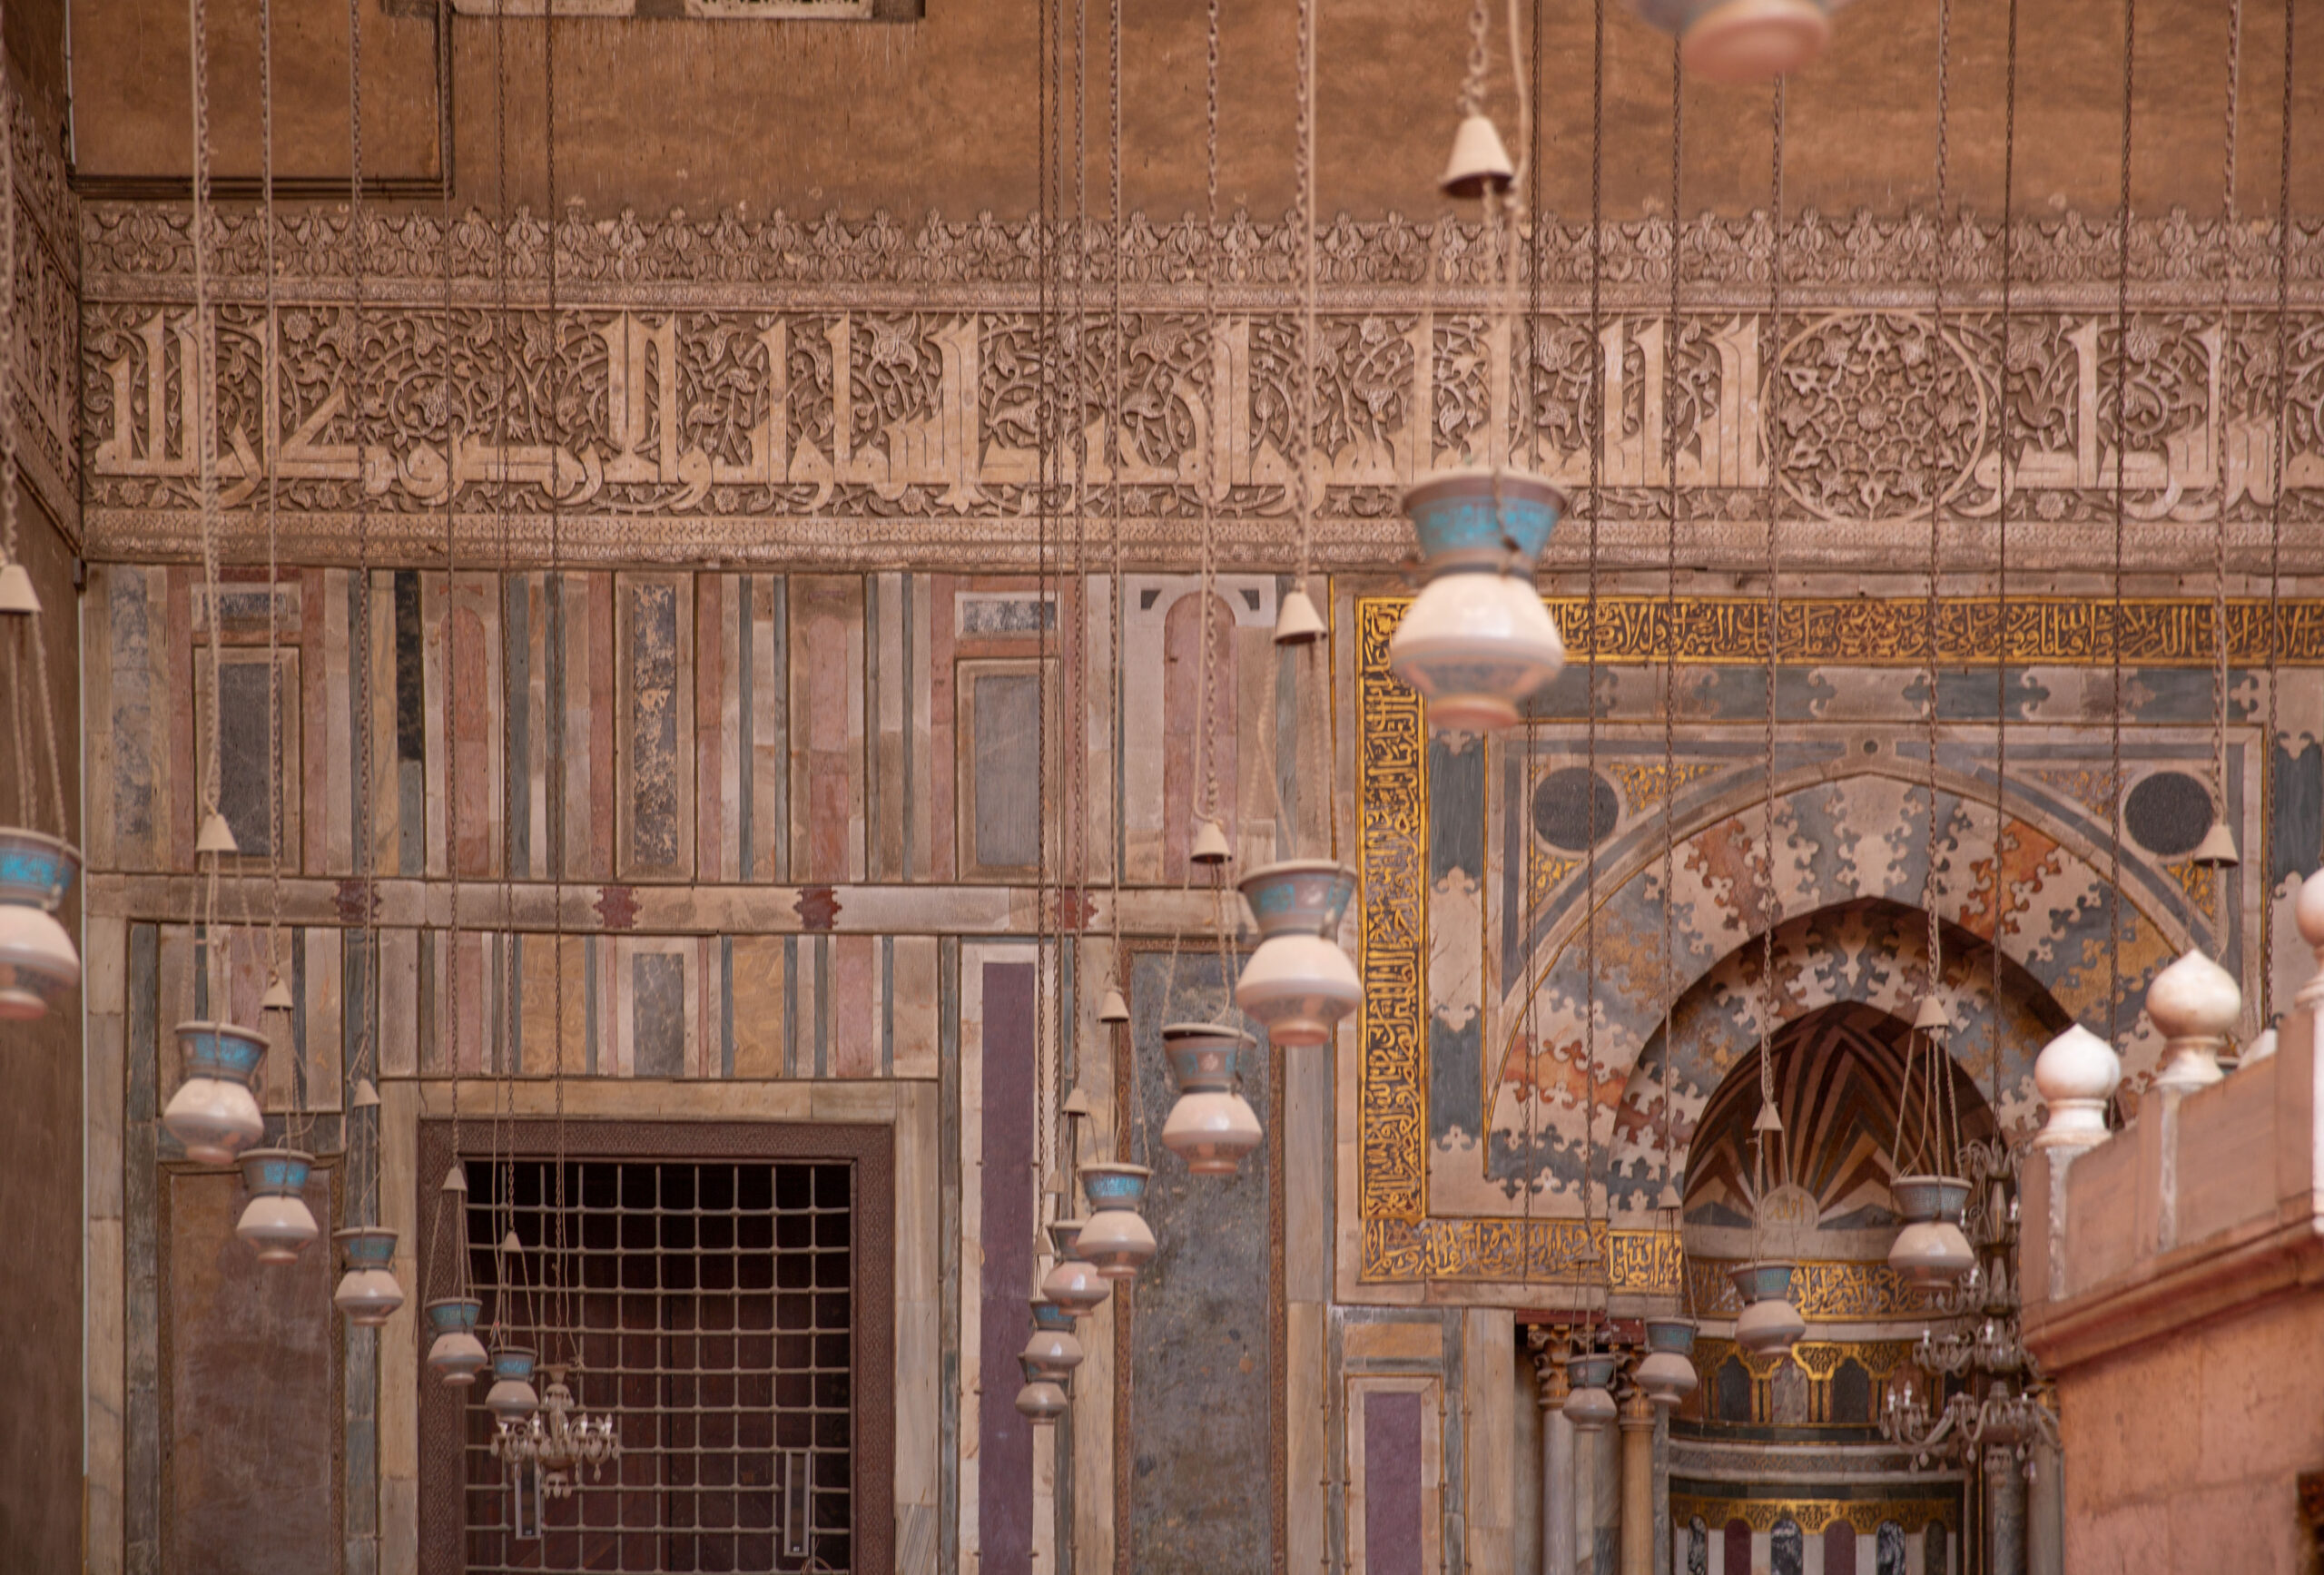 Modern glass lamps hanging in the sultan Hassan mosque, 14th century, Egypt (photo: Ariel Fein, CC BY-NC-SA 2.0)